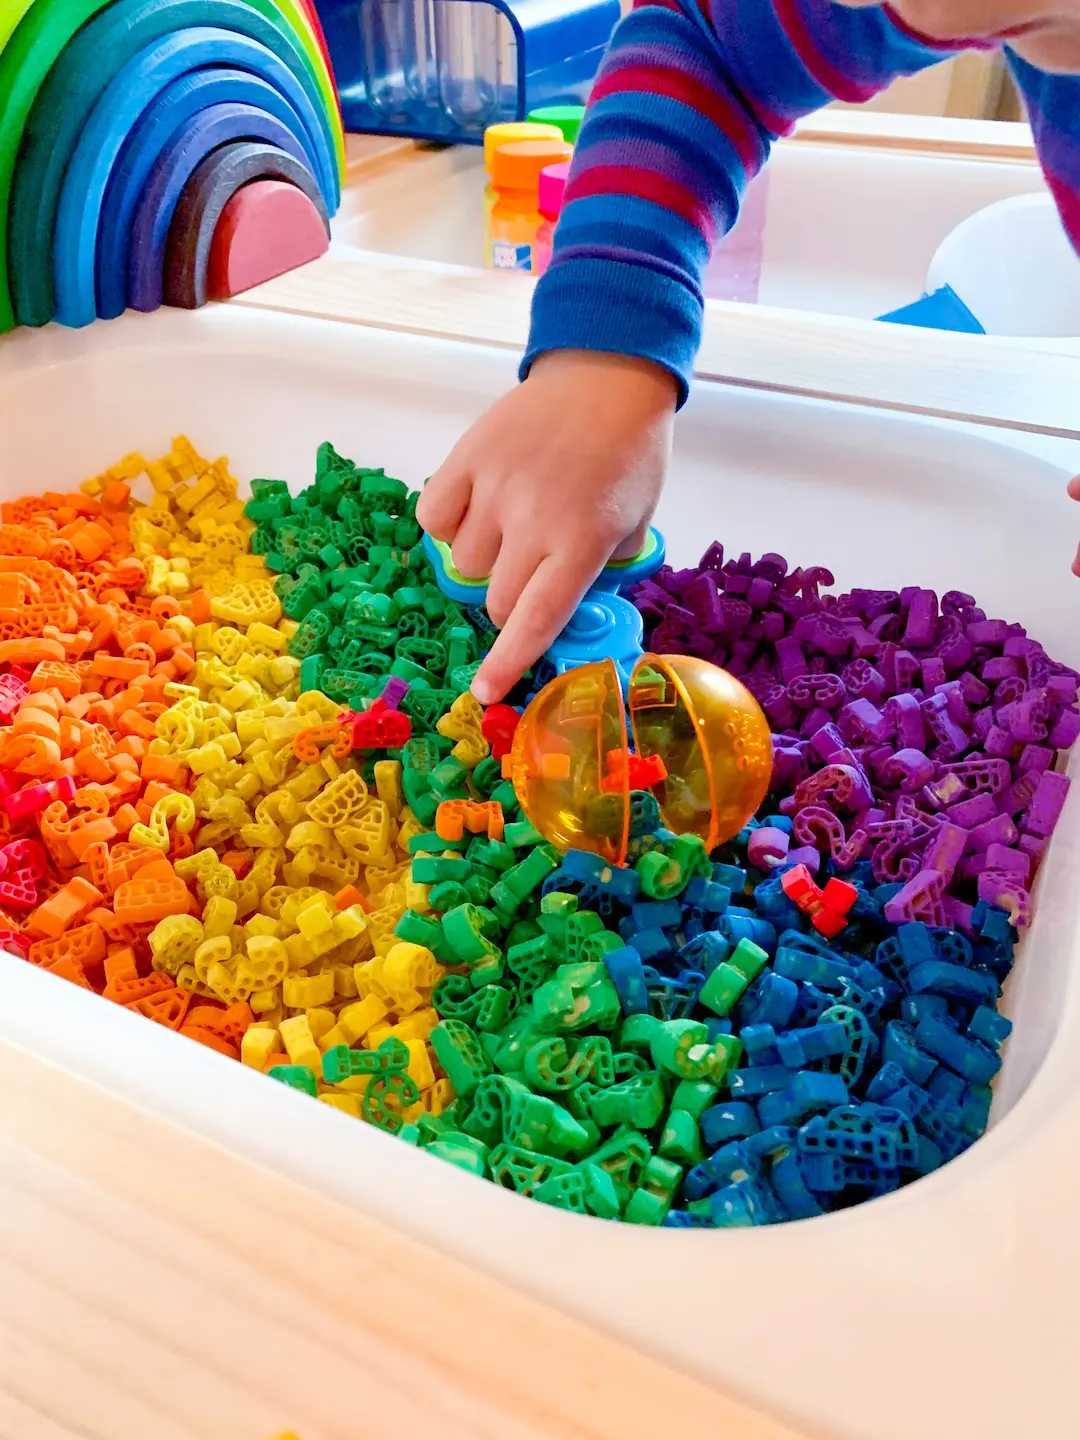 Sensory Activity for Toddlers: A Fun and Easy Toddler Activity